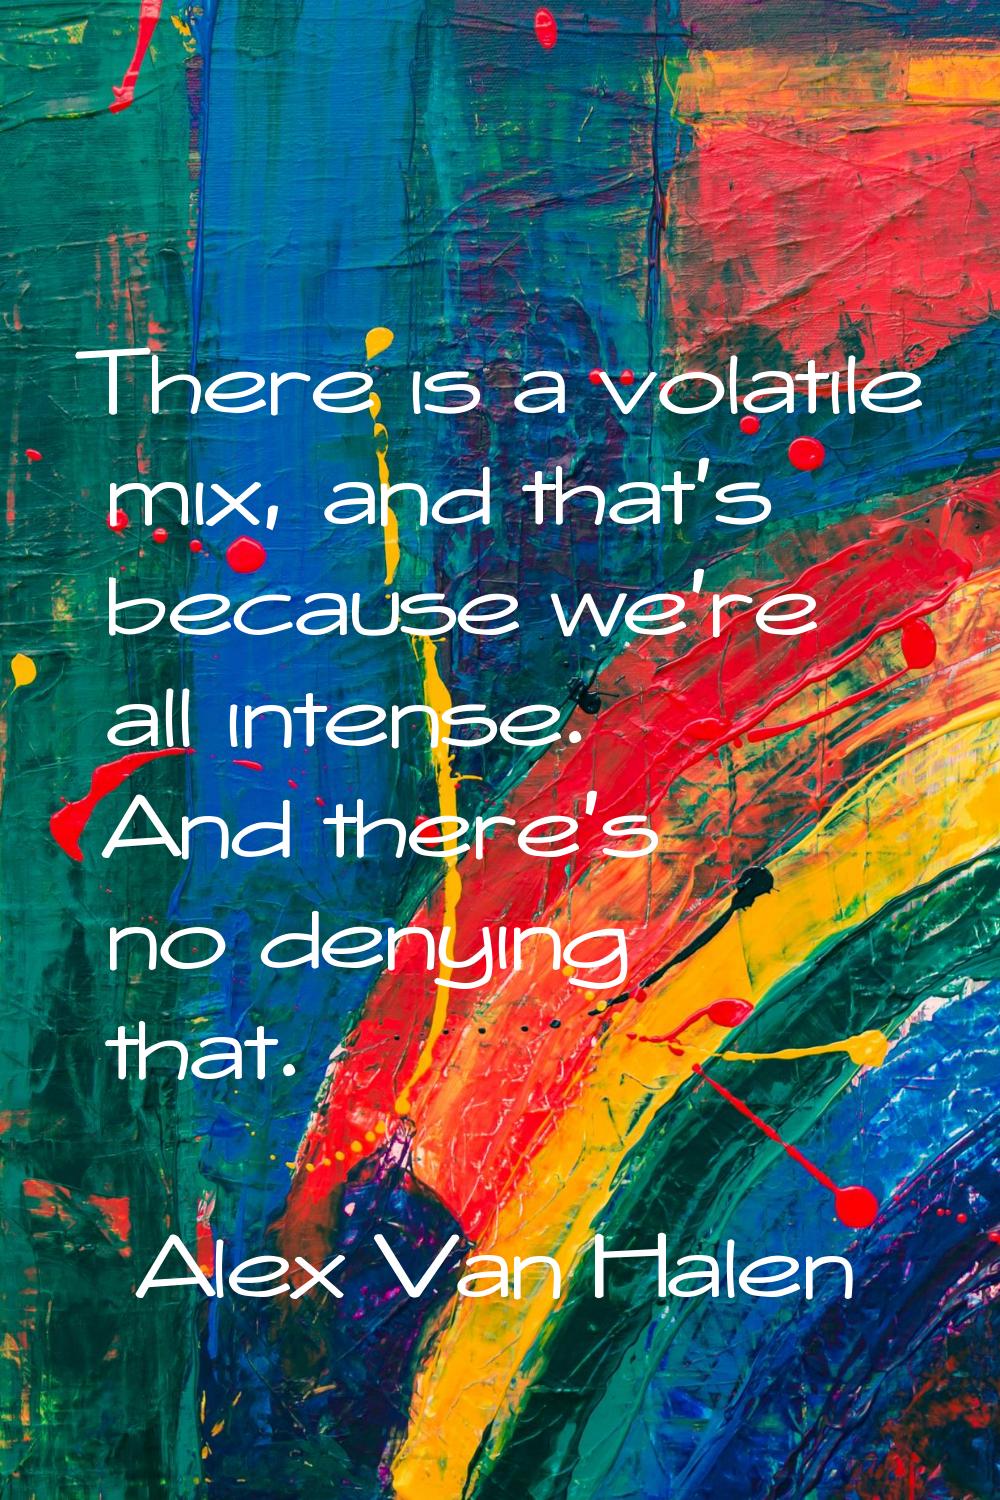 There is a volatile mix, and that's because we're all intense. And there's no denying that.